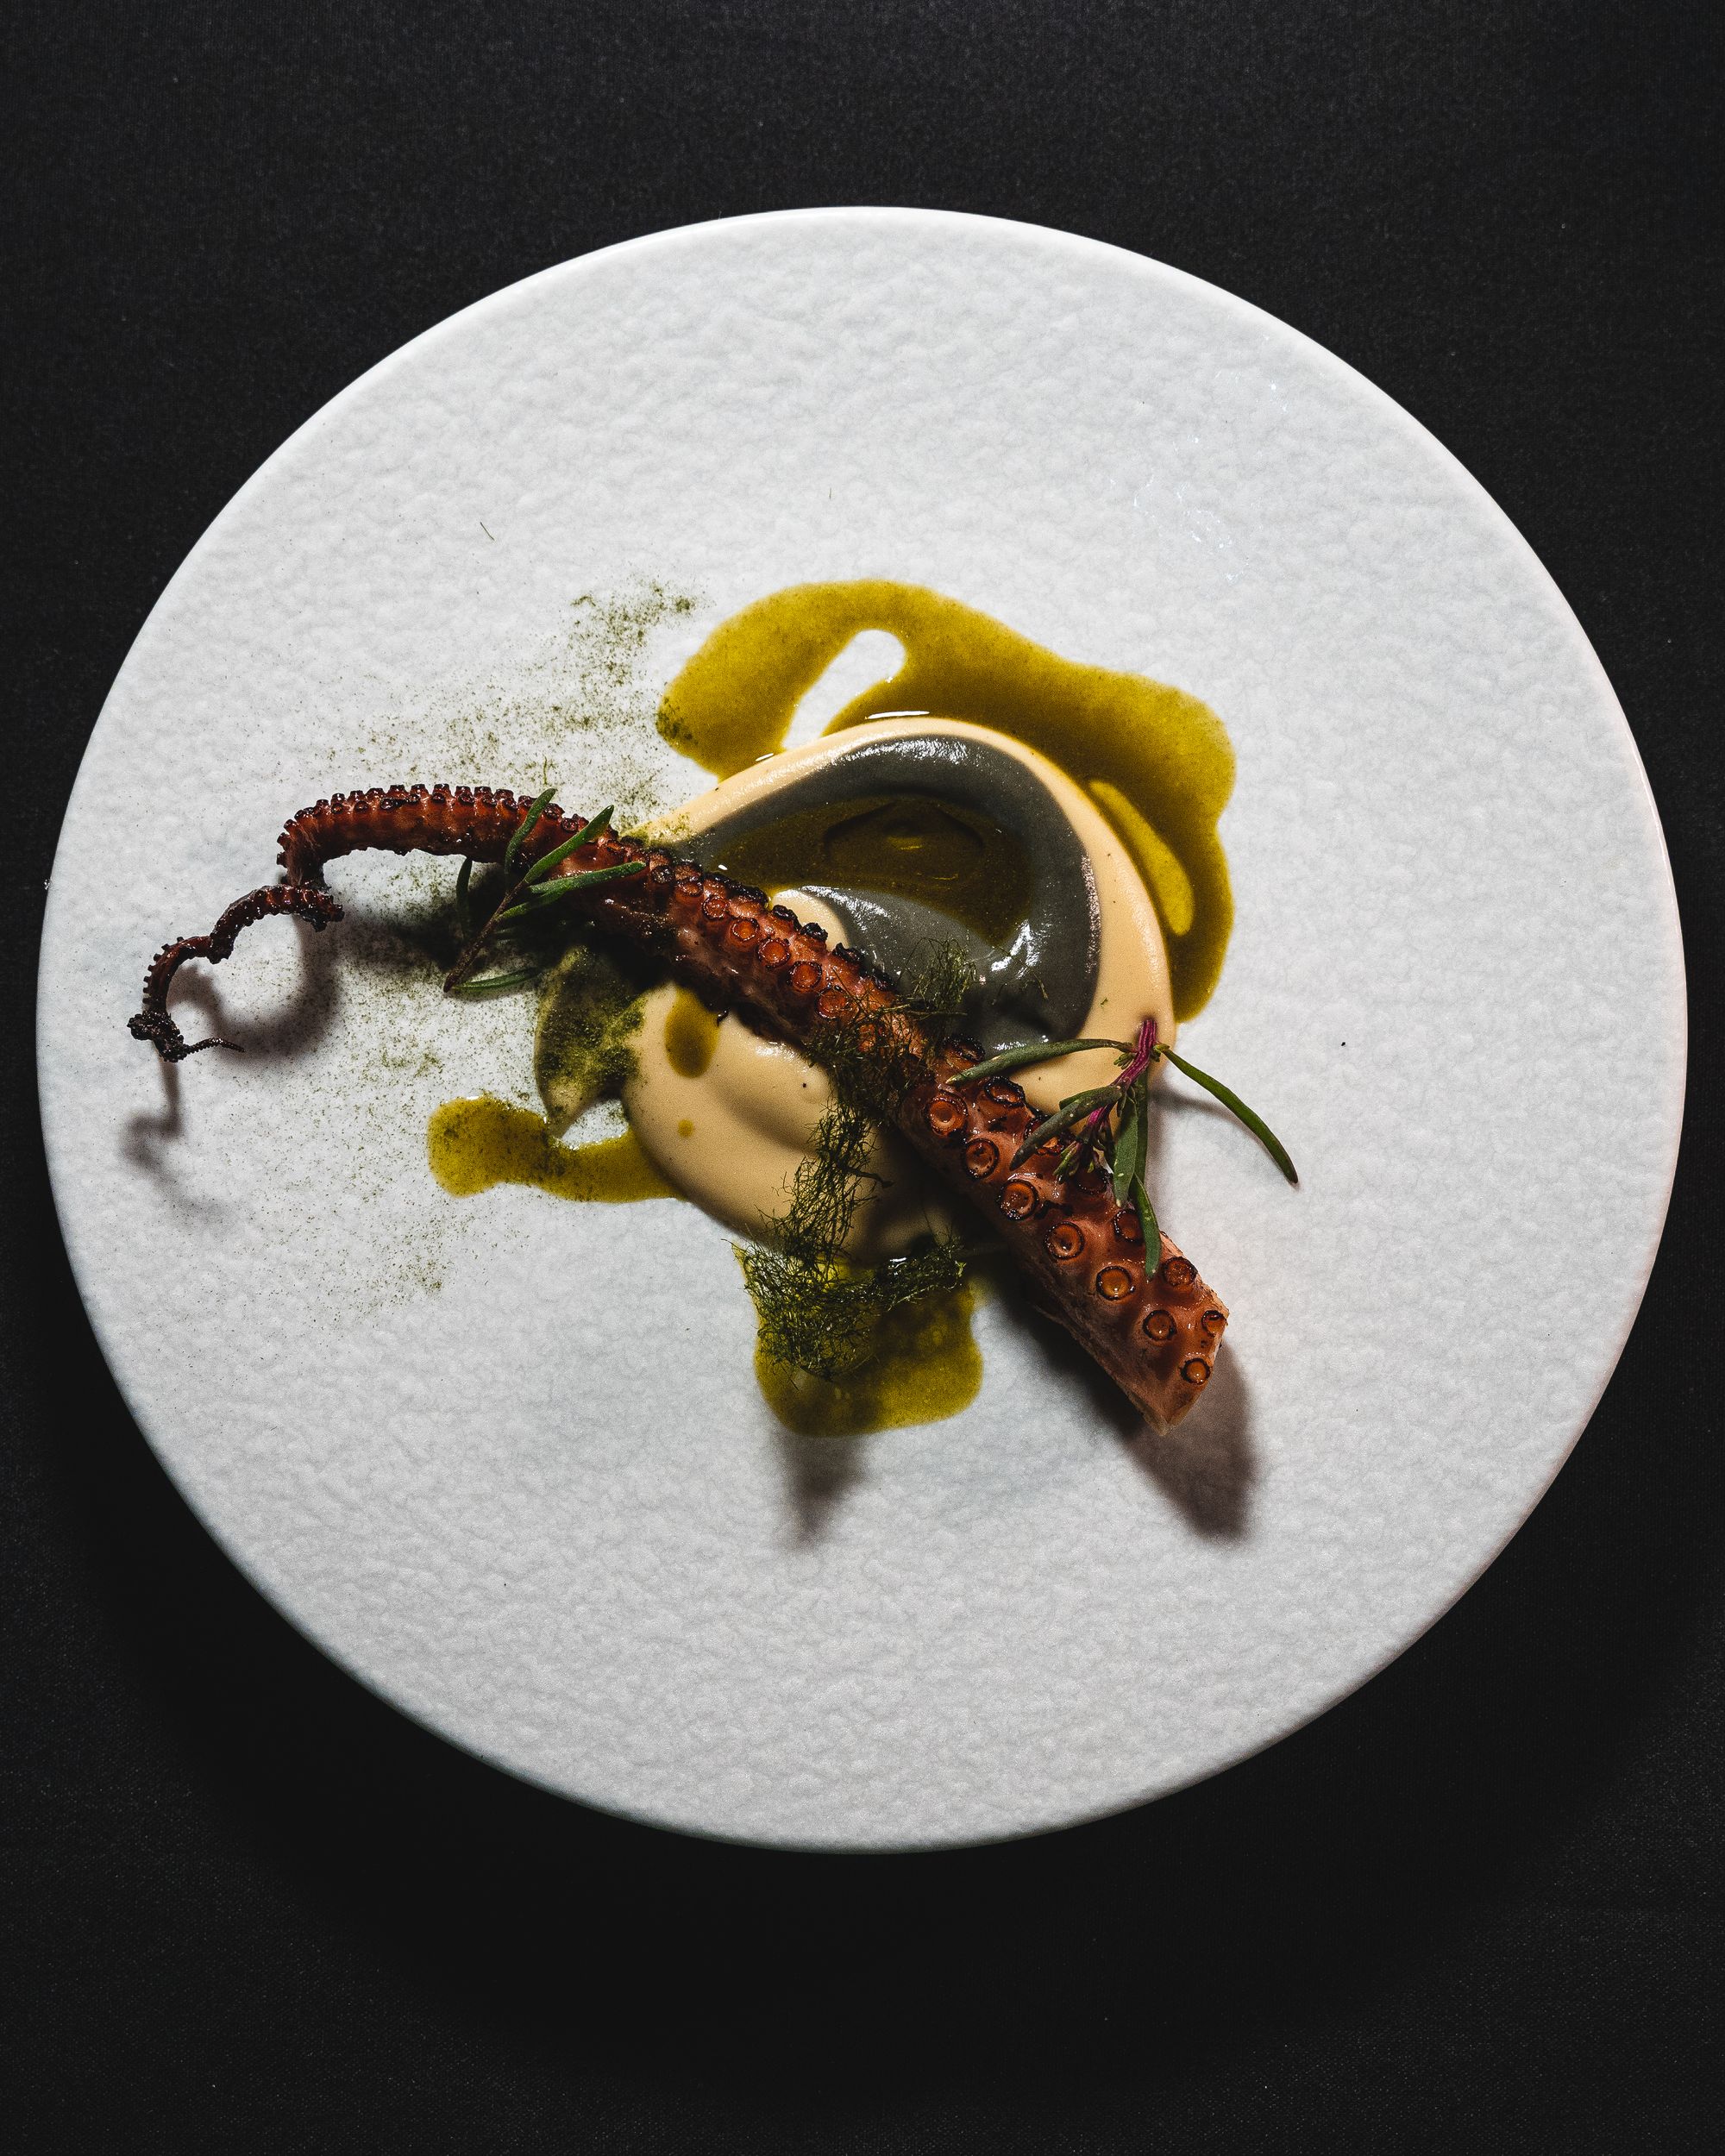 Top down shot of charred octopus tentacle